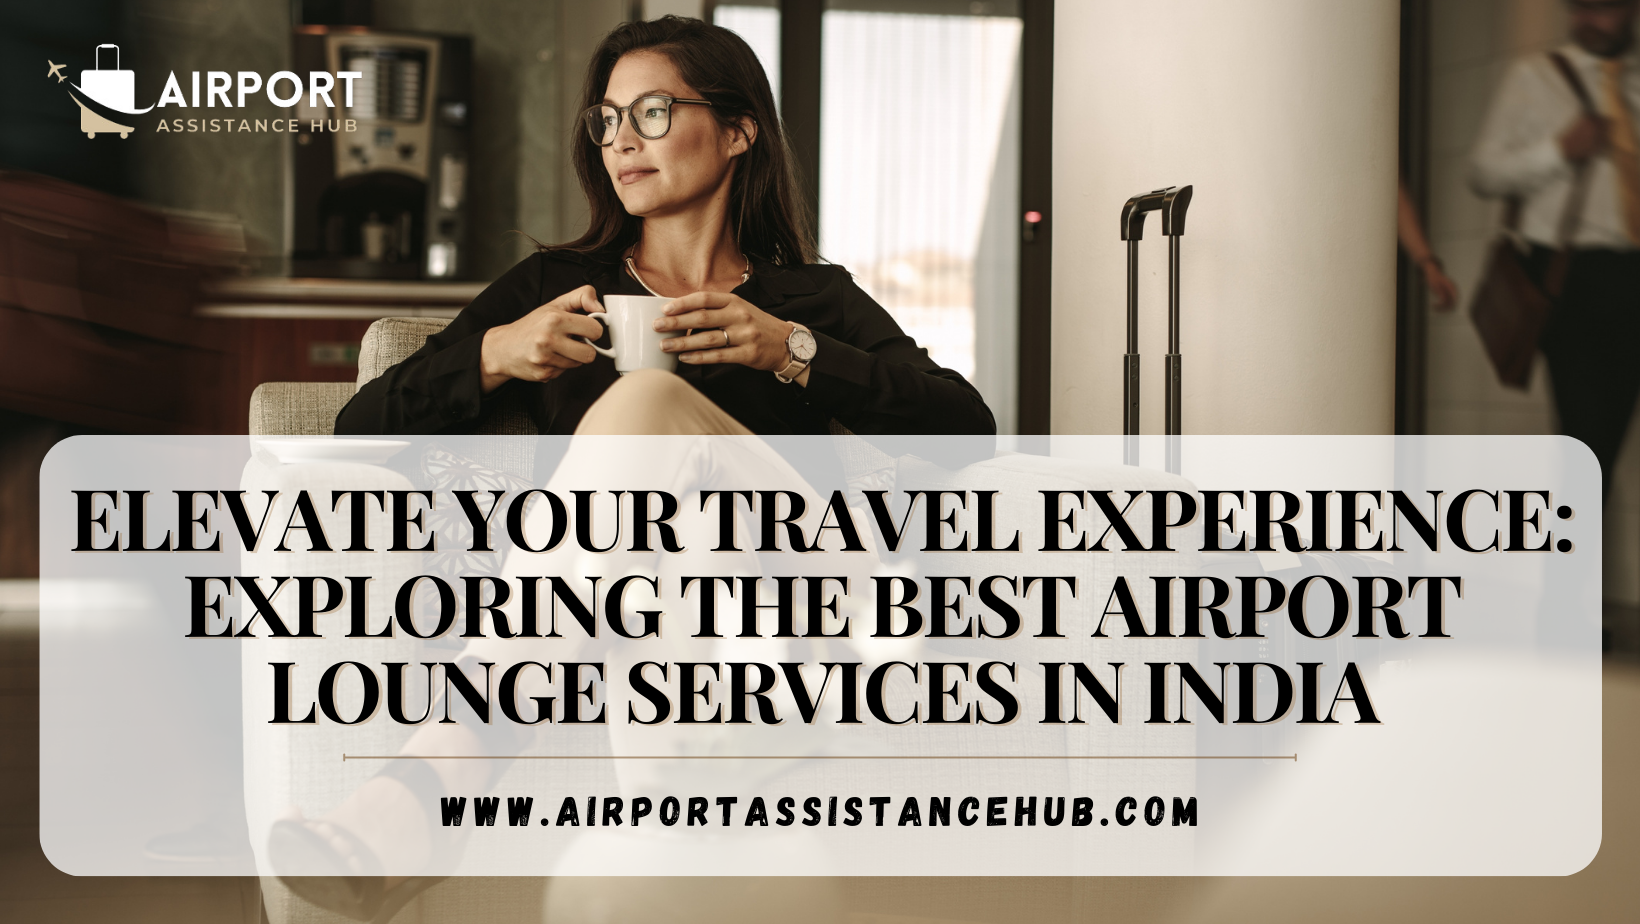 Elevate Your Travel Experience: Exploring the Best Airport Lounge Services in India